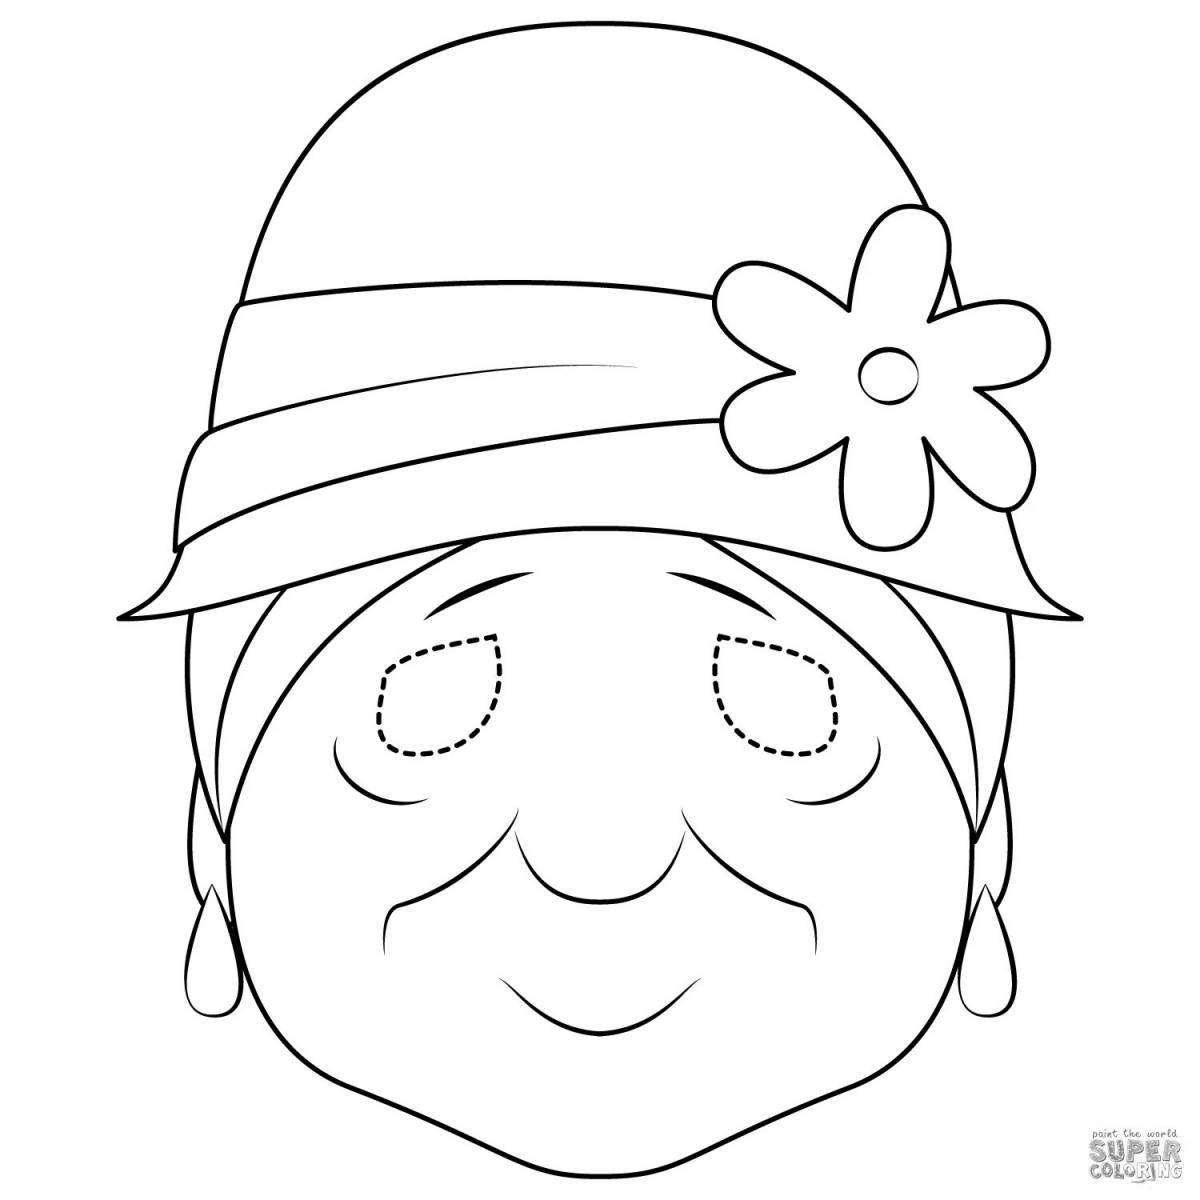 Coloring book majestic portrait of grandmother